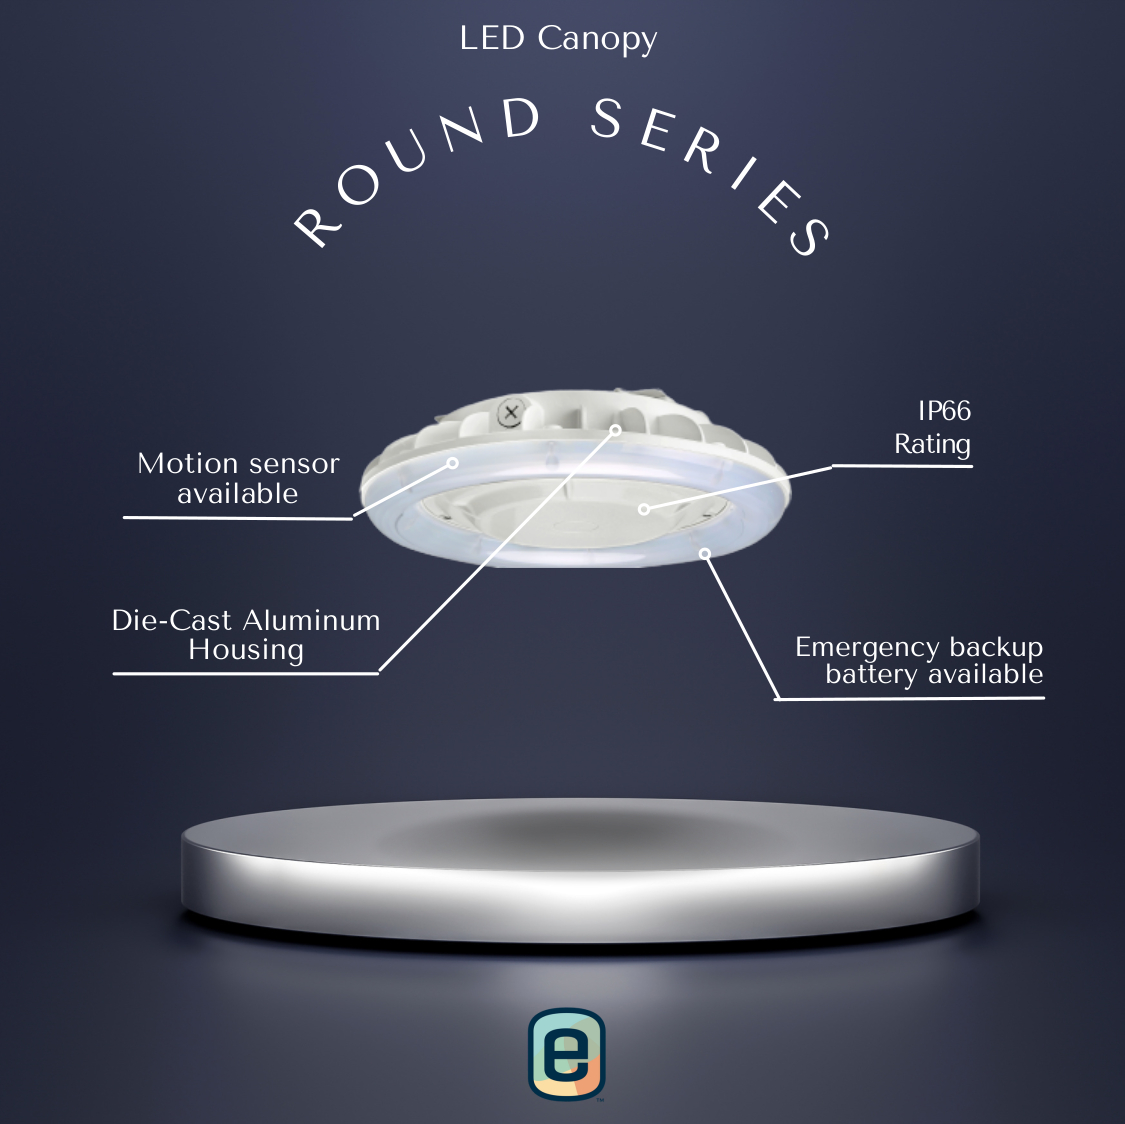 LED Canopy: Round Series